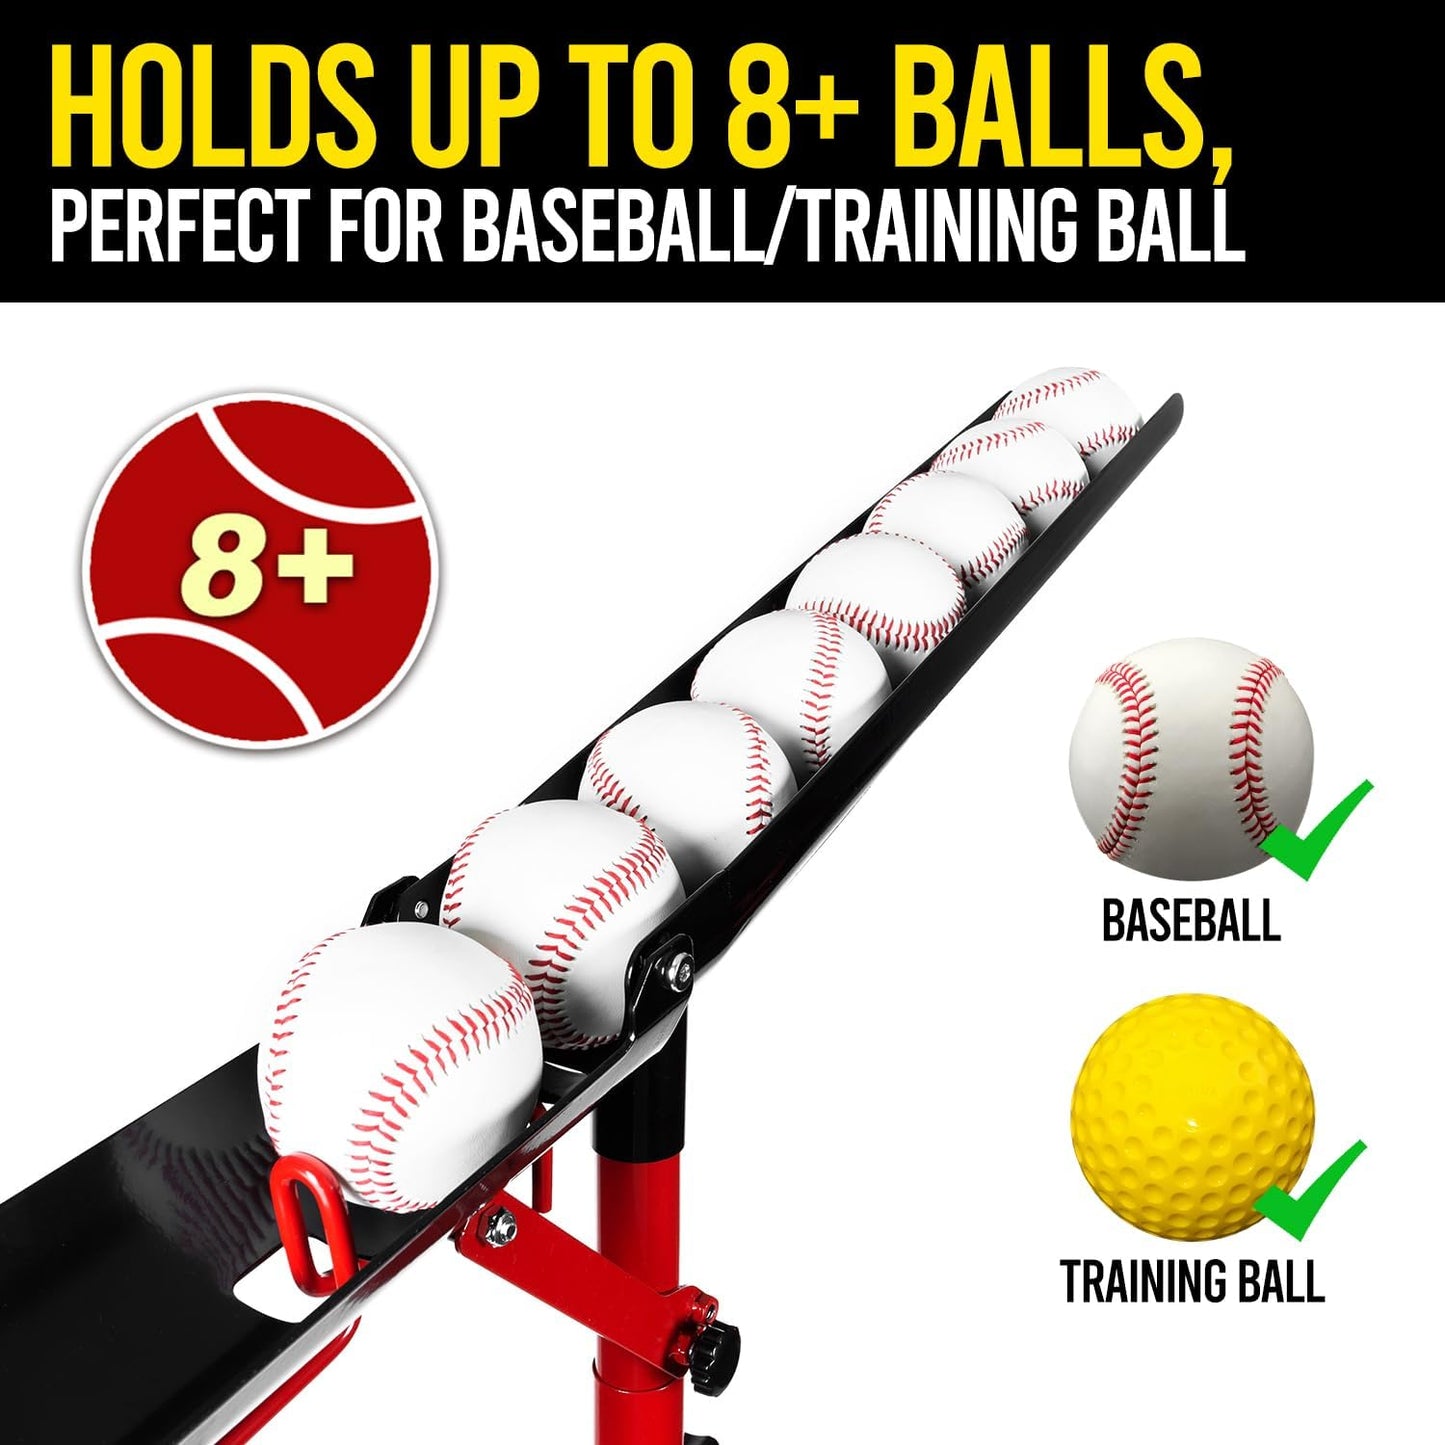 PLAYAPUT Baseball Soft Toss Drop Machine with Rebound Net,Slide Down Speed and Height Adjustable Baseball Pitching Machine for Professional,Can Hold Up to 8 Balls | Included Carrybag